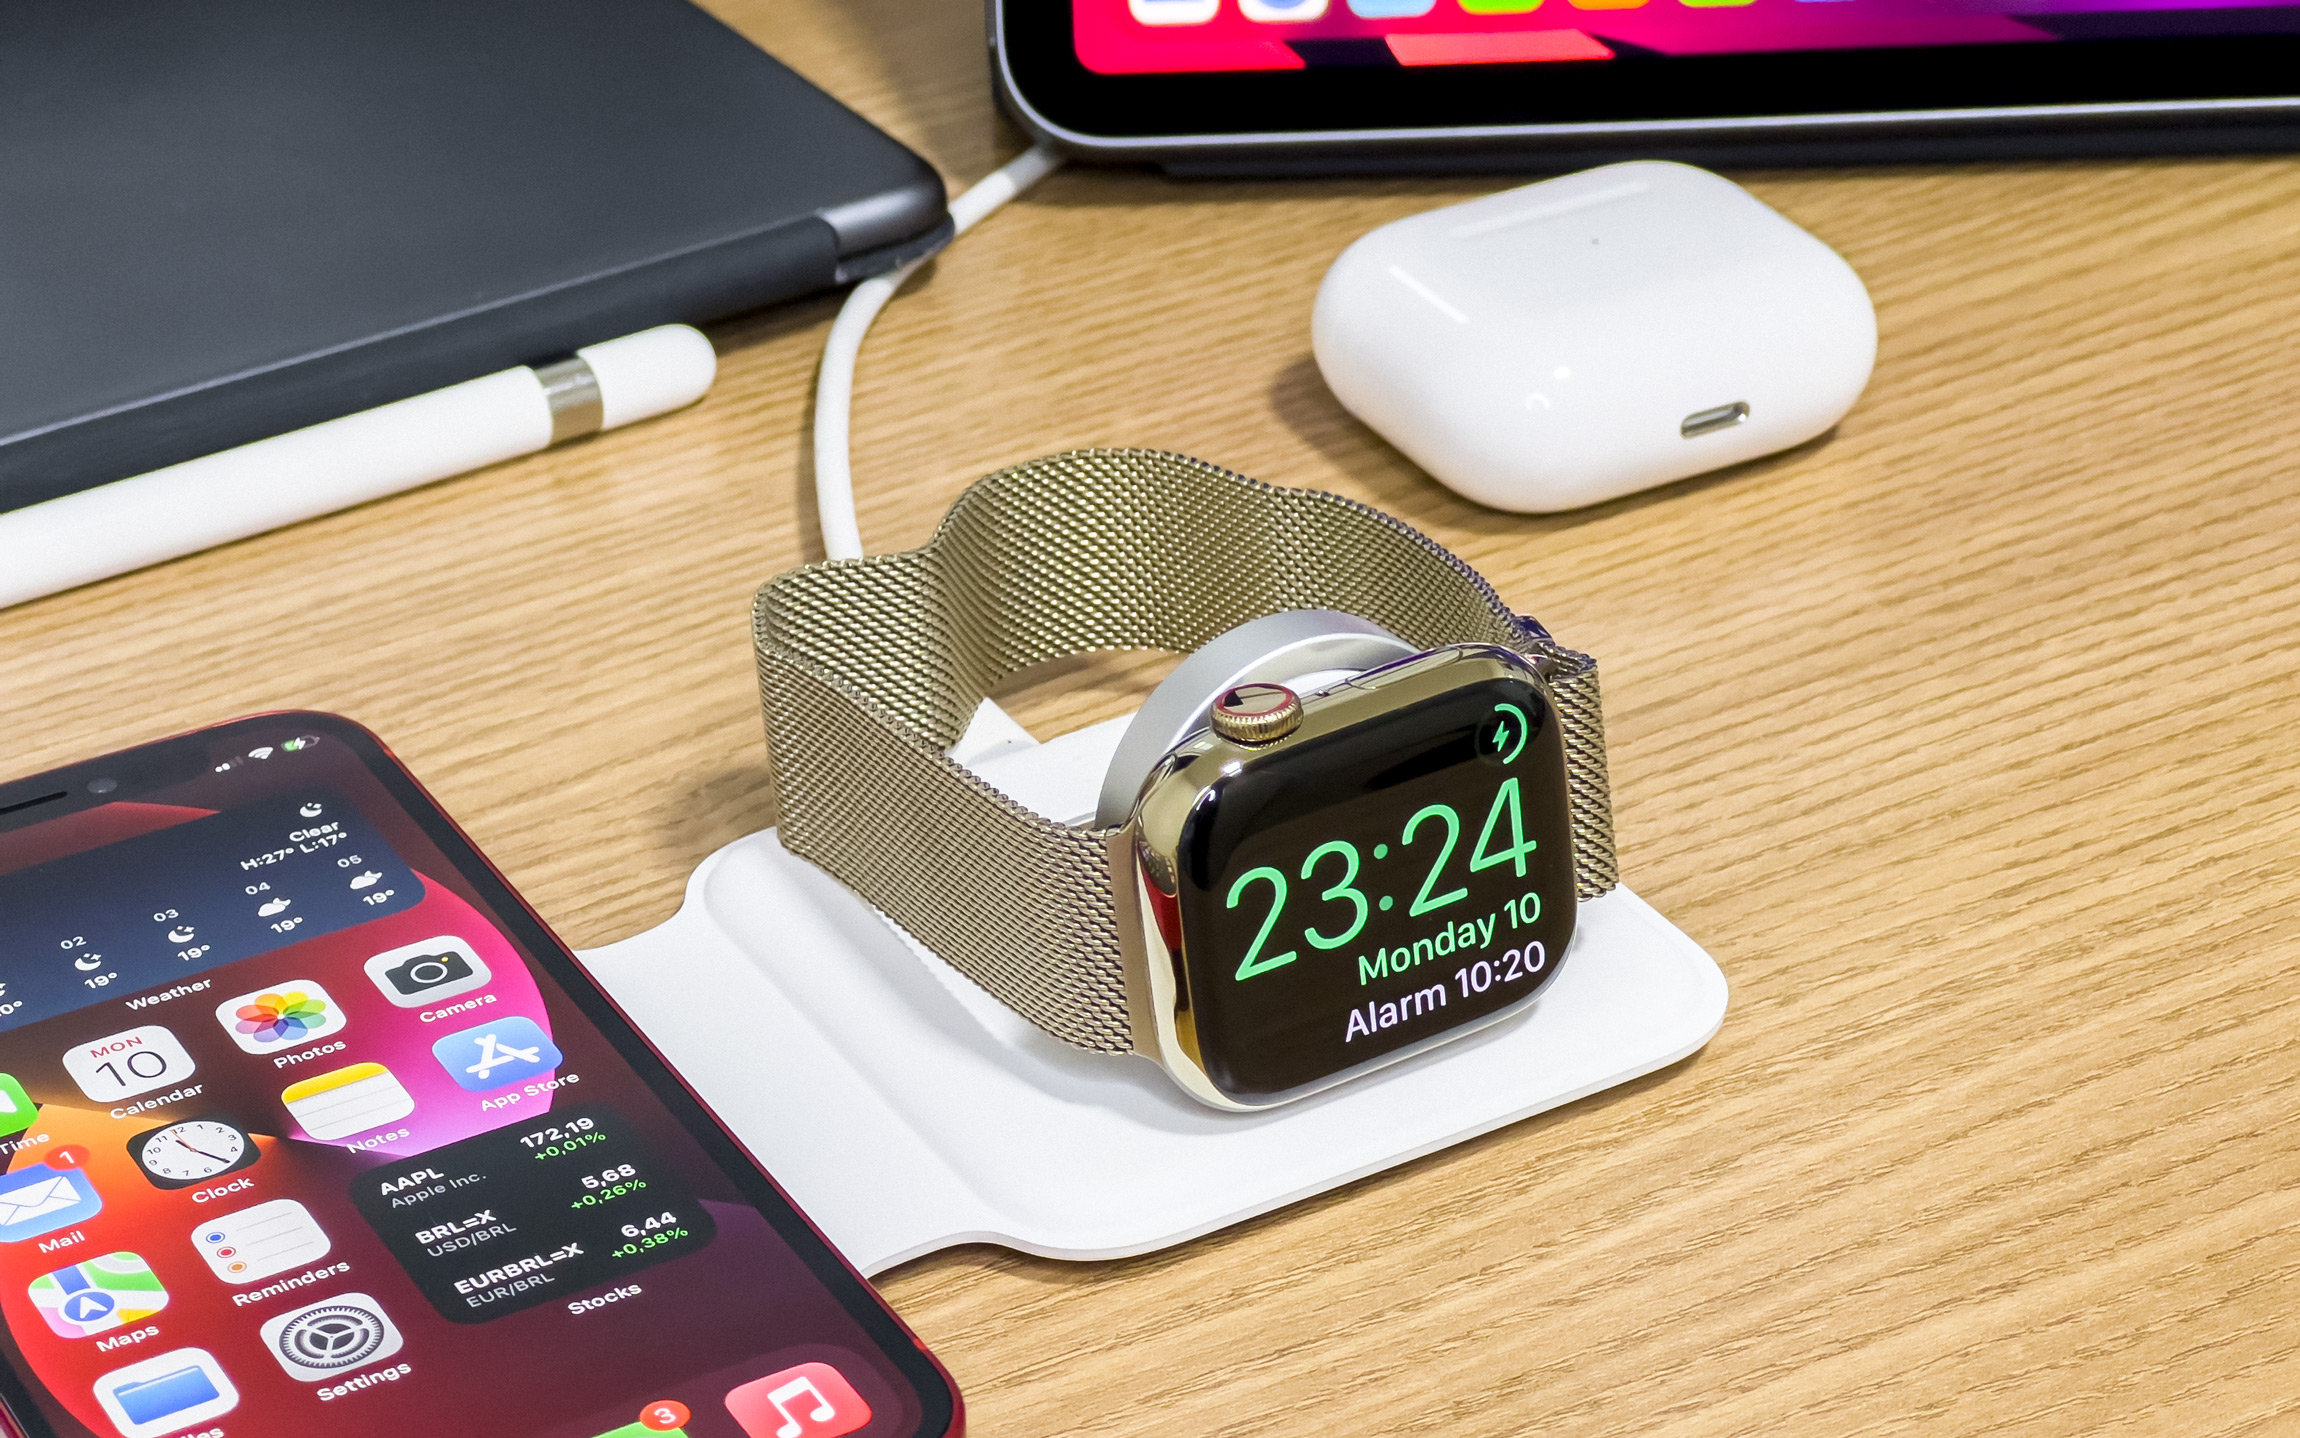 https://9to5mac.com/wp-content/uploads/sites/6/2022/01/Apple-Watch-charging-battery.jpg?quality=82&strip=all